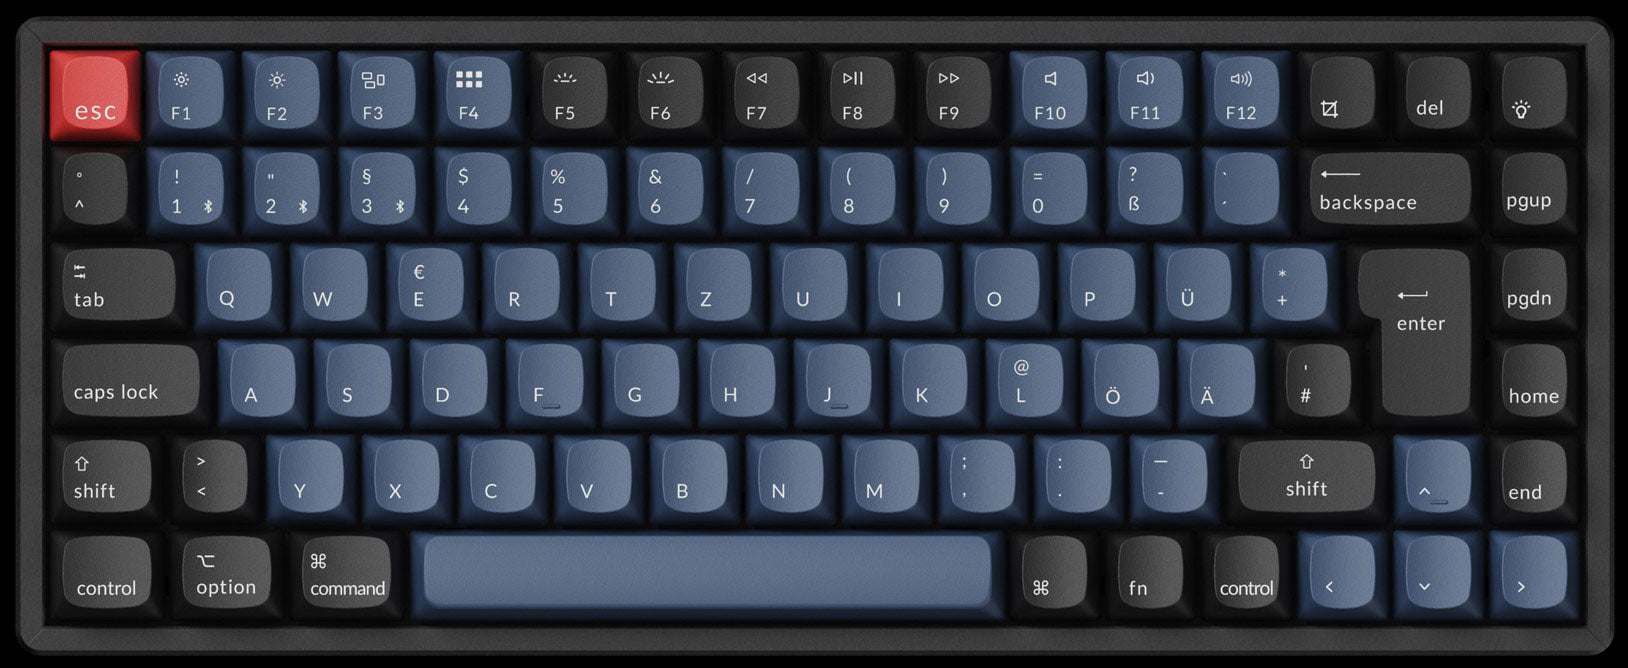 K2 Pro Iso 123 Keychron &Lt;Div Class=&Quot;Okr-Block-Clipboard&Quot; Data-Okr=&Quot;%7B%22Okrdelta%22%3A%5B%7B%22Linetype%22%3A%22Text%22%2C%22Lineoptions%22%3A%7B%7D%2C%22Linecontent%22%3A%5B%7B%22Optype%22%3A%22Text%22%2C%22Options%22%3A%7B%22Text%22%3A%22We%20Have%20Shipped%20Most%20Of%20The%20Pre-Orders%20Made%20Before%20September%2015Th.%20The%20Orders%20That%20Were%20Placed%20After%20September%2015Th%20Are%20Expected%20To%20Be%20Shipped%20Out%20Before%20October%2015Th.%22%7D%7D%5D%7D%5D%2C%22Businesskey%22%3A%22Lark-Doc%22%7D&Quot;&Gt;Keychron K2 Pro Qmk/Via Wireless Custom Mechanical Keyboard Allows &Lt;Span Style=&Quot;Font-Weight: 400;&Quot;&Gt;Anyone To Master Any Keys Or Macro Commands On Its 75% Compact Layout Through Via, It&Lt;/Span&Gt; Has Included Keycaps For Both Windows And Macos, And Users Can Hot-Swap With Any Mx Mechanical Switch In A Breeze.&Lt;/Div&Gt; &Lt;H5&Gt;We Also Provide International Wholesale And Retail Shipping To All Gcc Countries: Saudi Arabia, Qatar, Oman, Kuwait, Bahrain.&Lt;/H5&Gt; Keychron K2 Pro Keychron K2 Pro Qmk/Via Wireless Mechanical Keyboard - Blue Switch